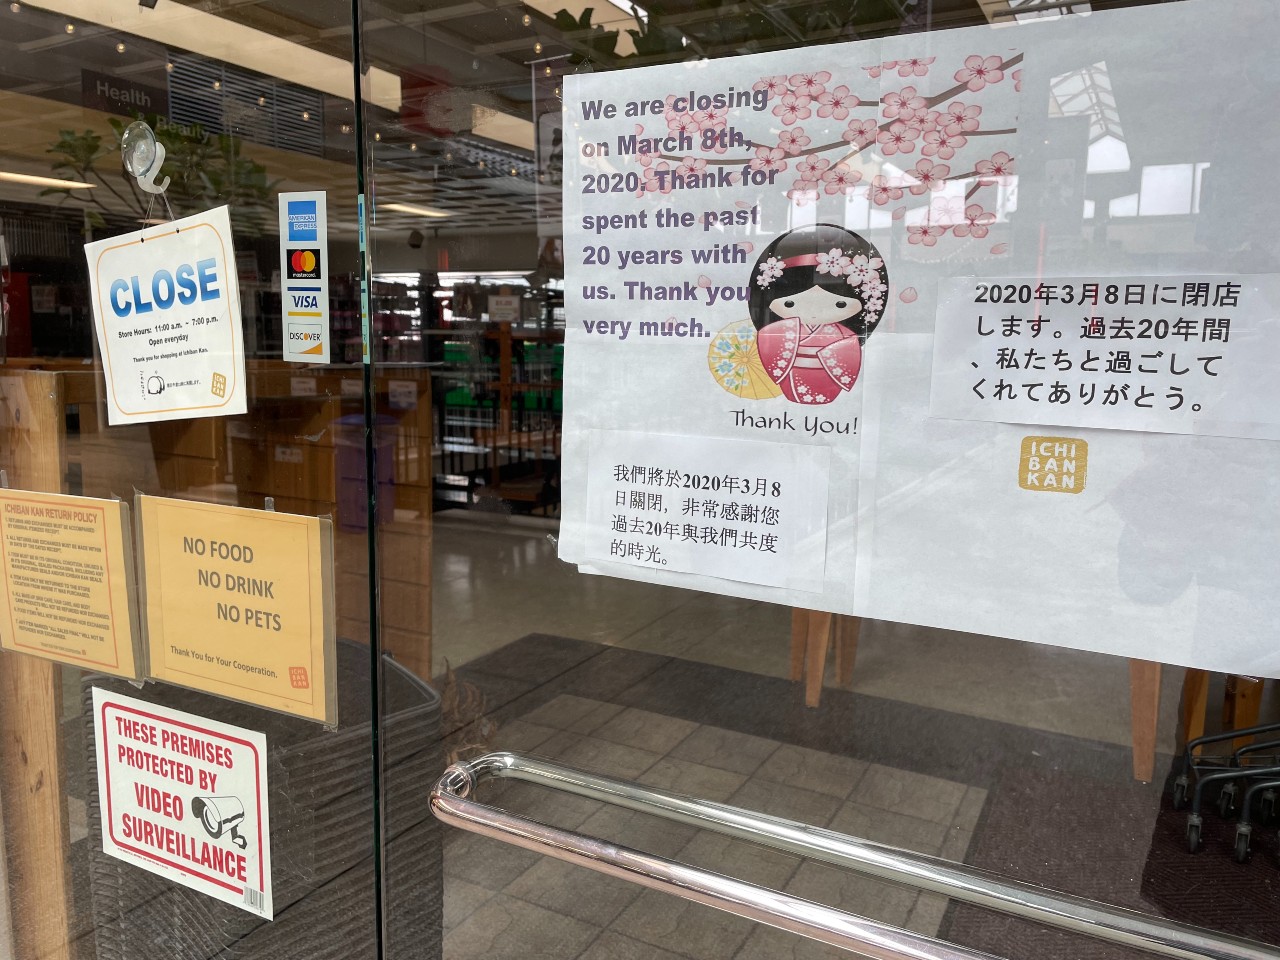 The sign at the shuttered Ichibankan store says "We are closing on March 8th, 2020. Thank for spent the past 20 years with us."